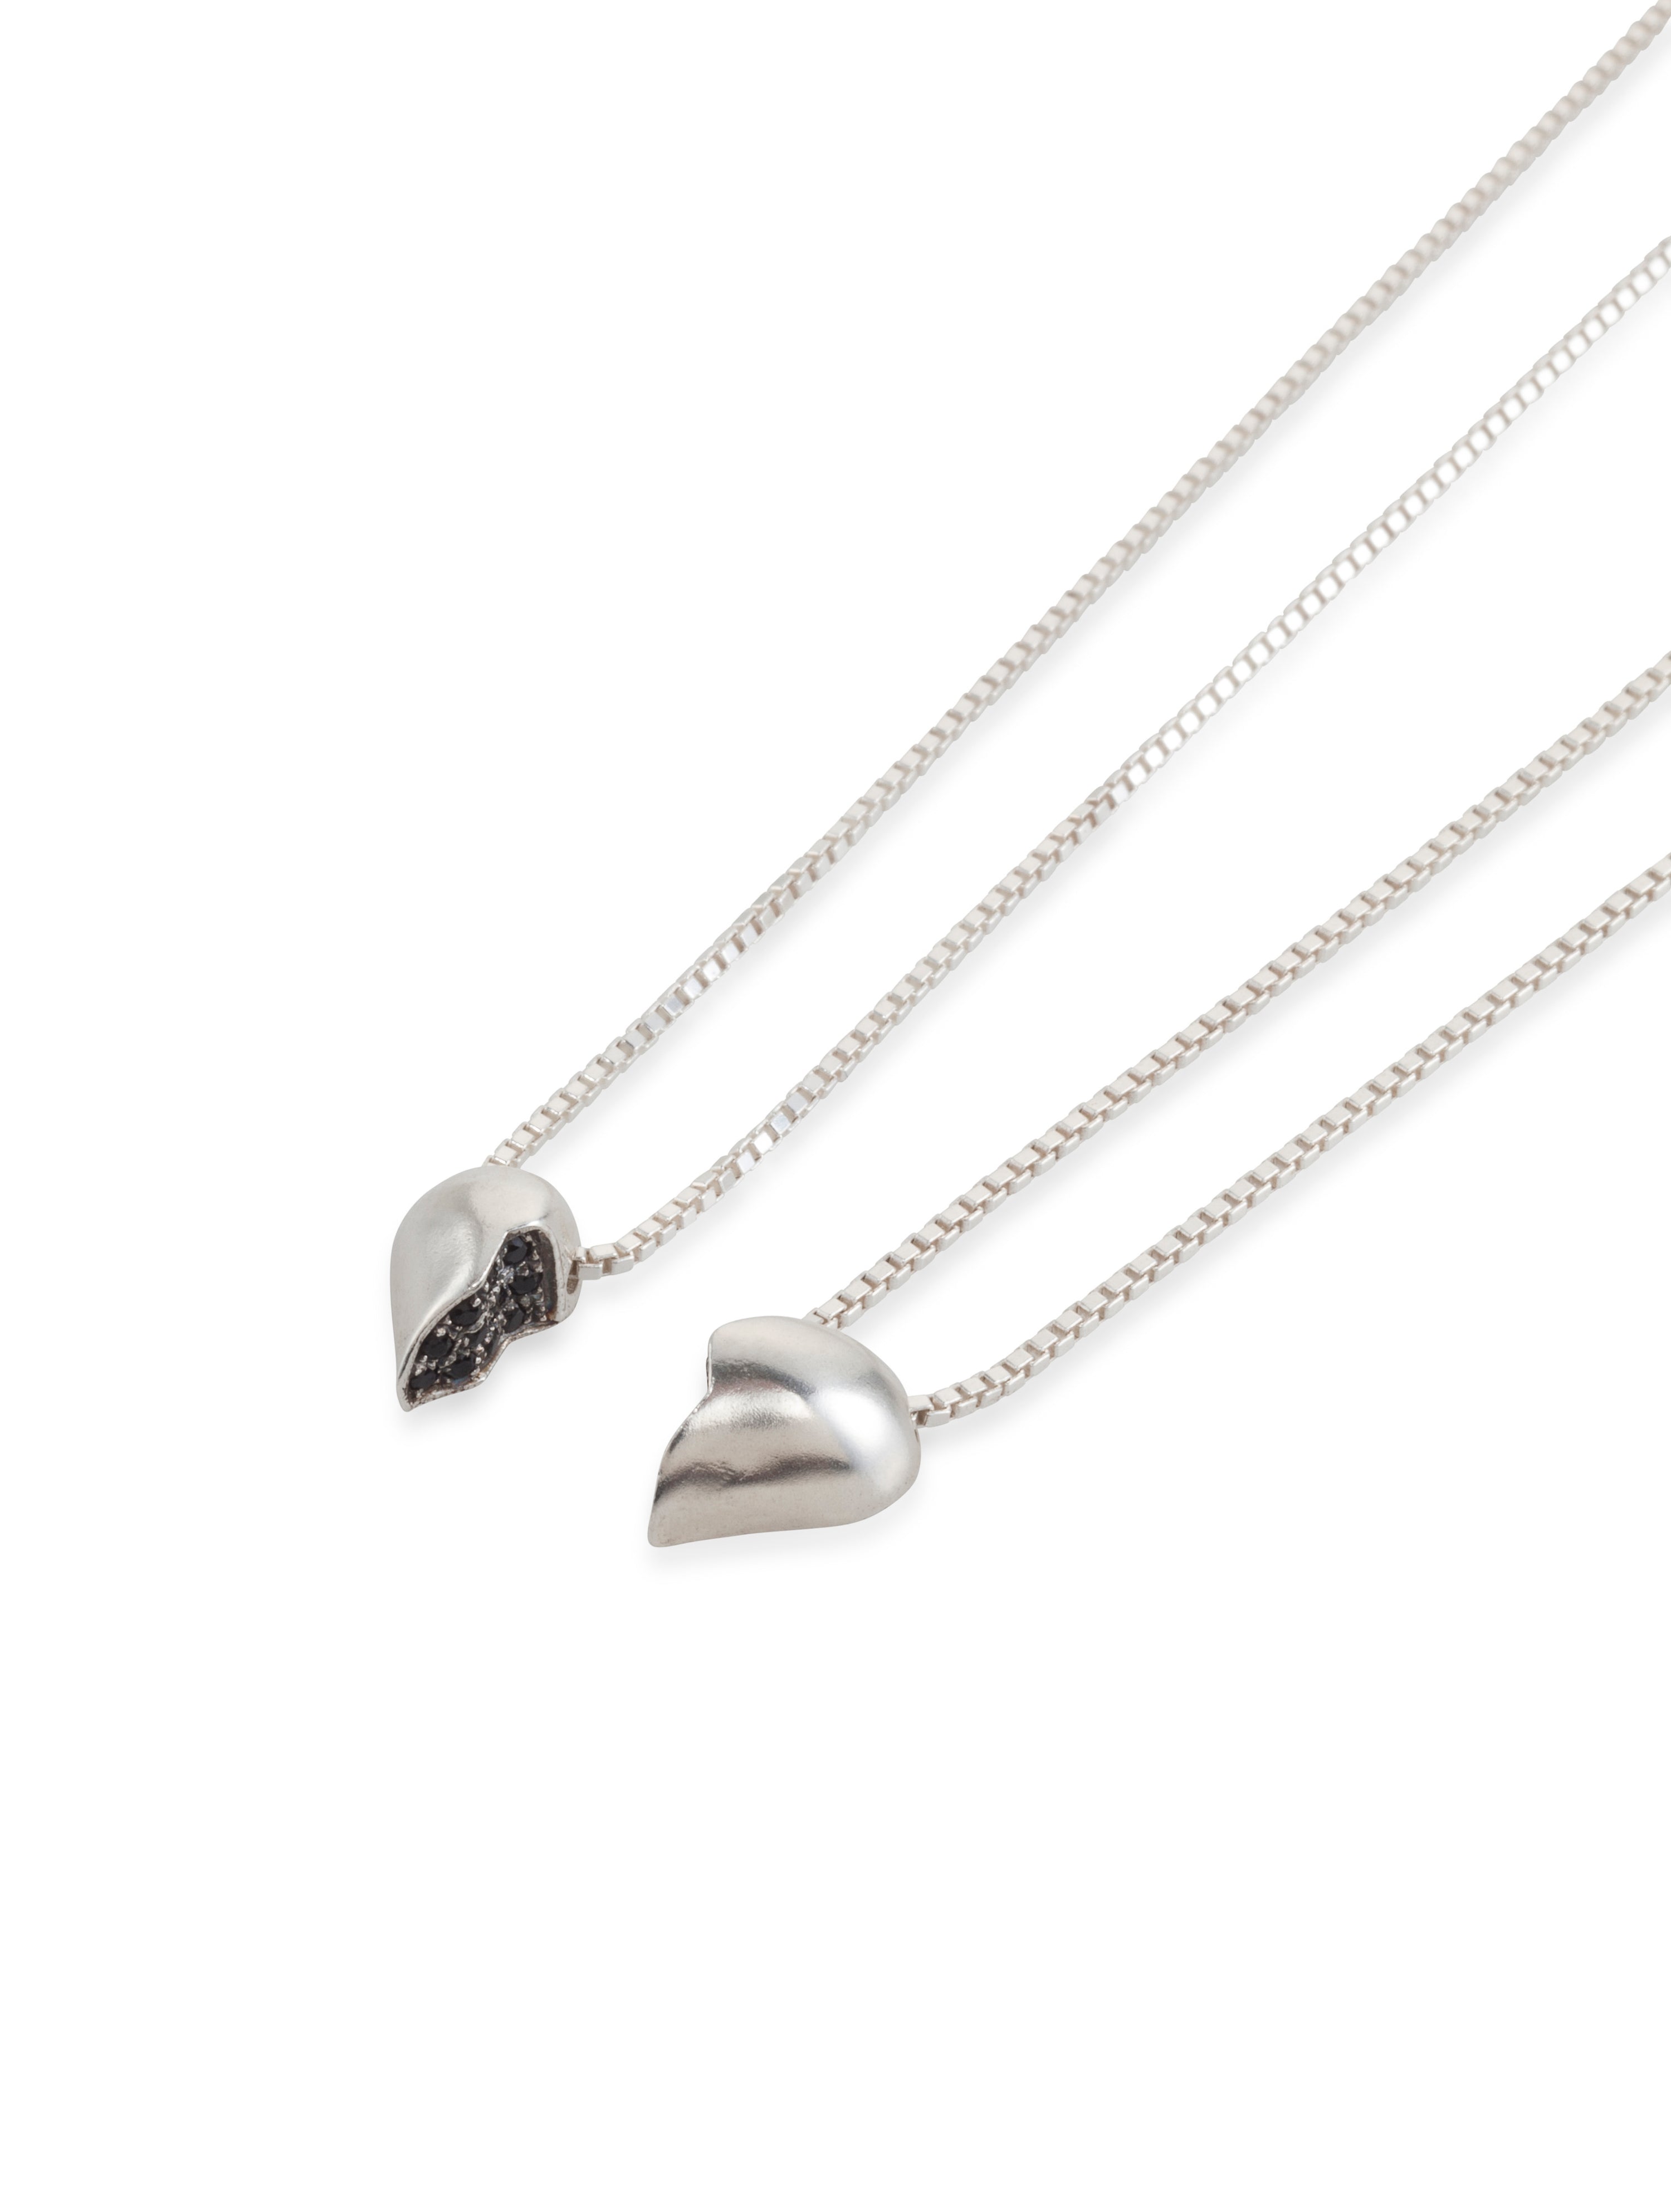 silver half small heart necklace with black stones